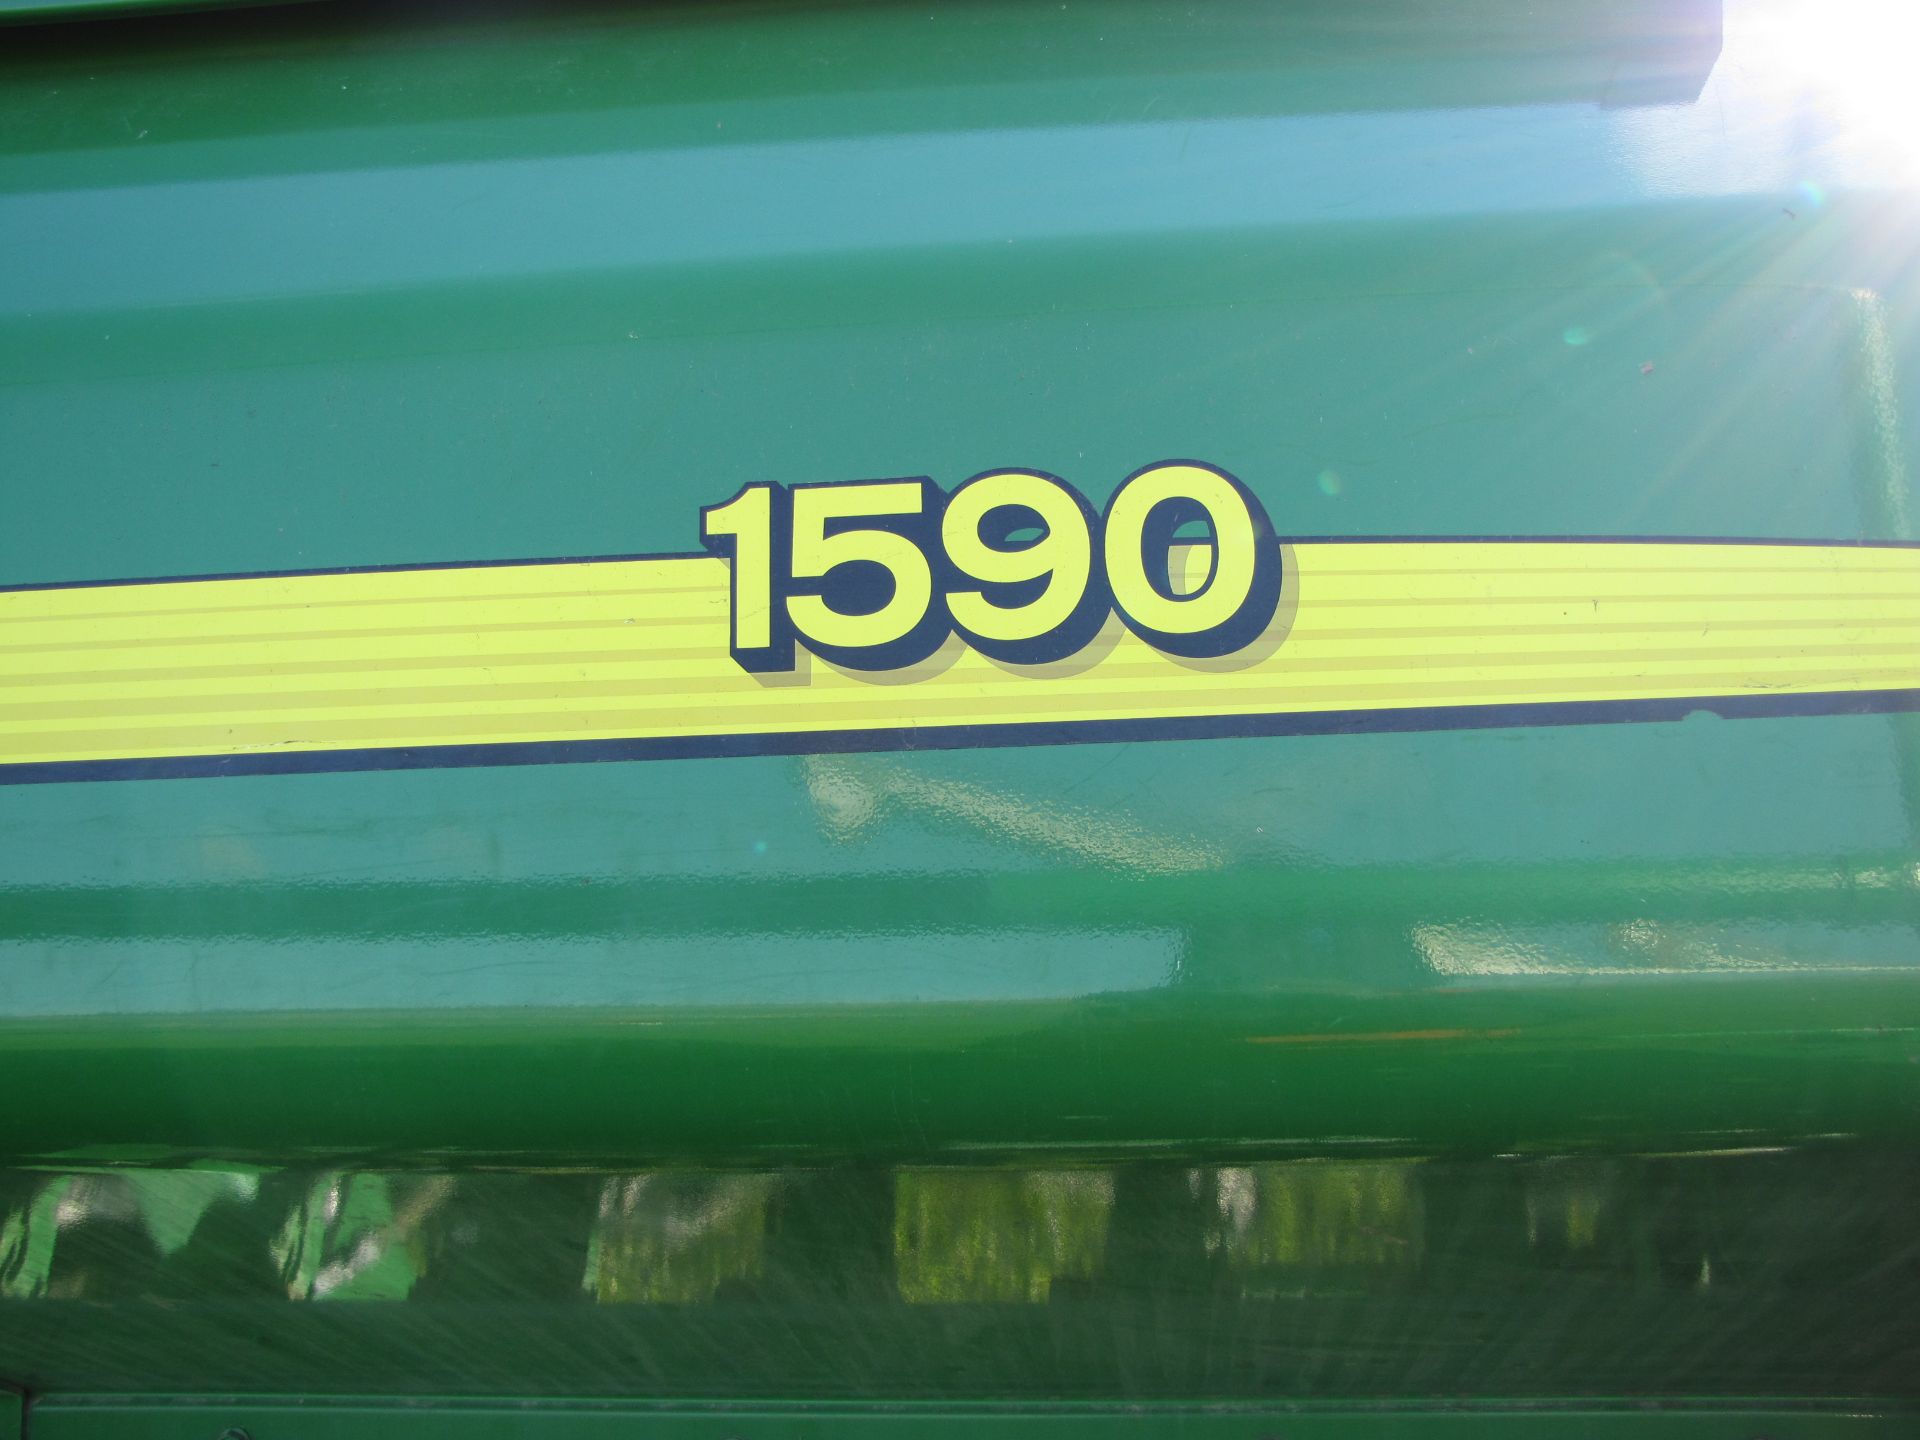 15’ John Deere 1590 no-till drill, elec rate controller, 7 ½” spacing, markers, wired for monitor - Image 10 of 33